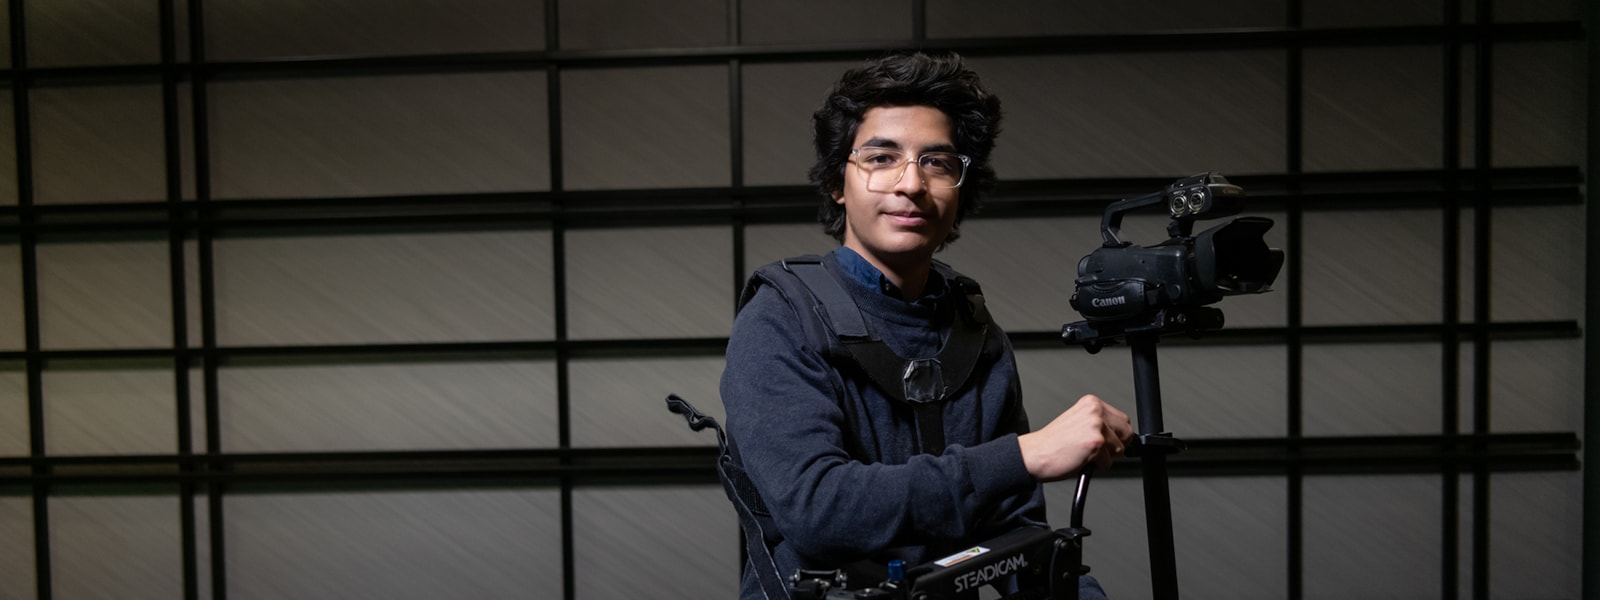 Student holding camera in a film and television studio.